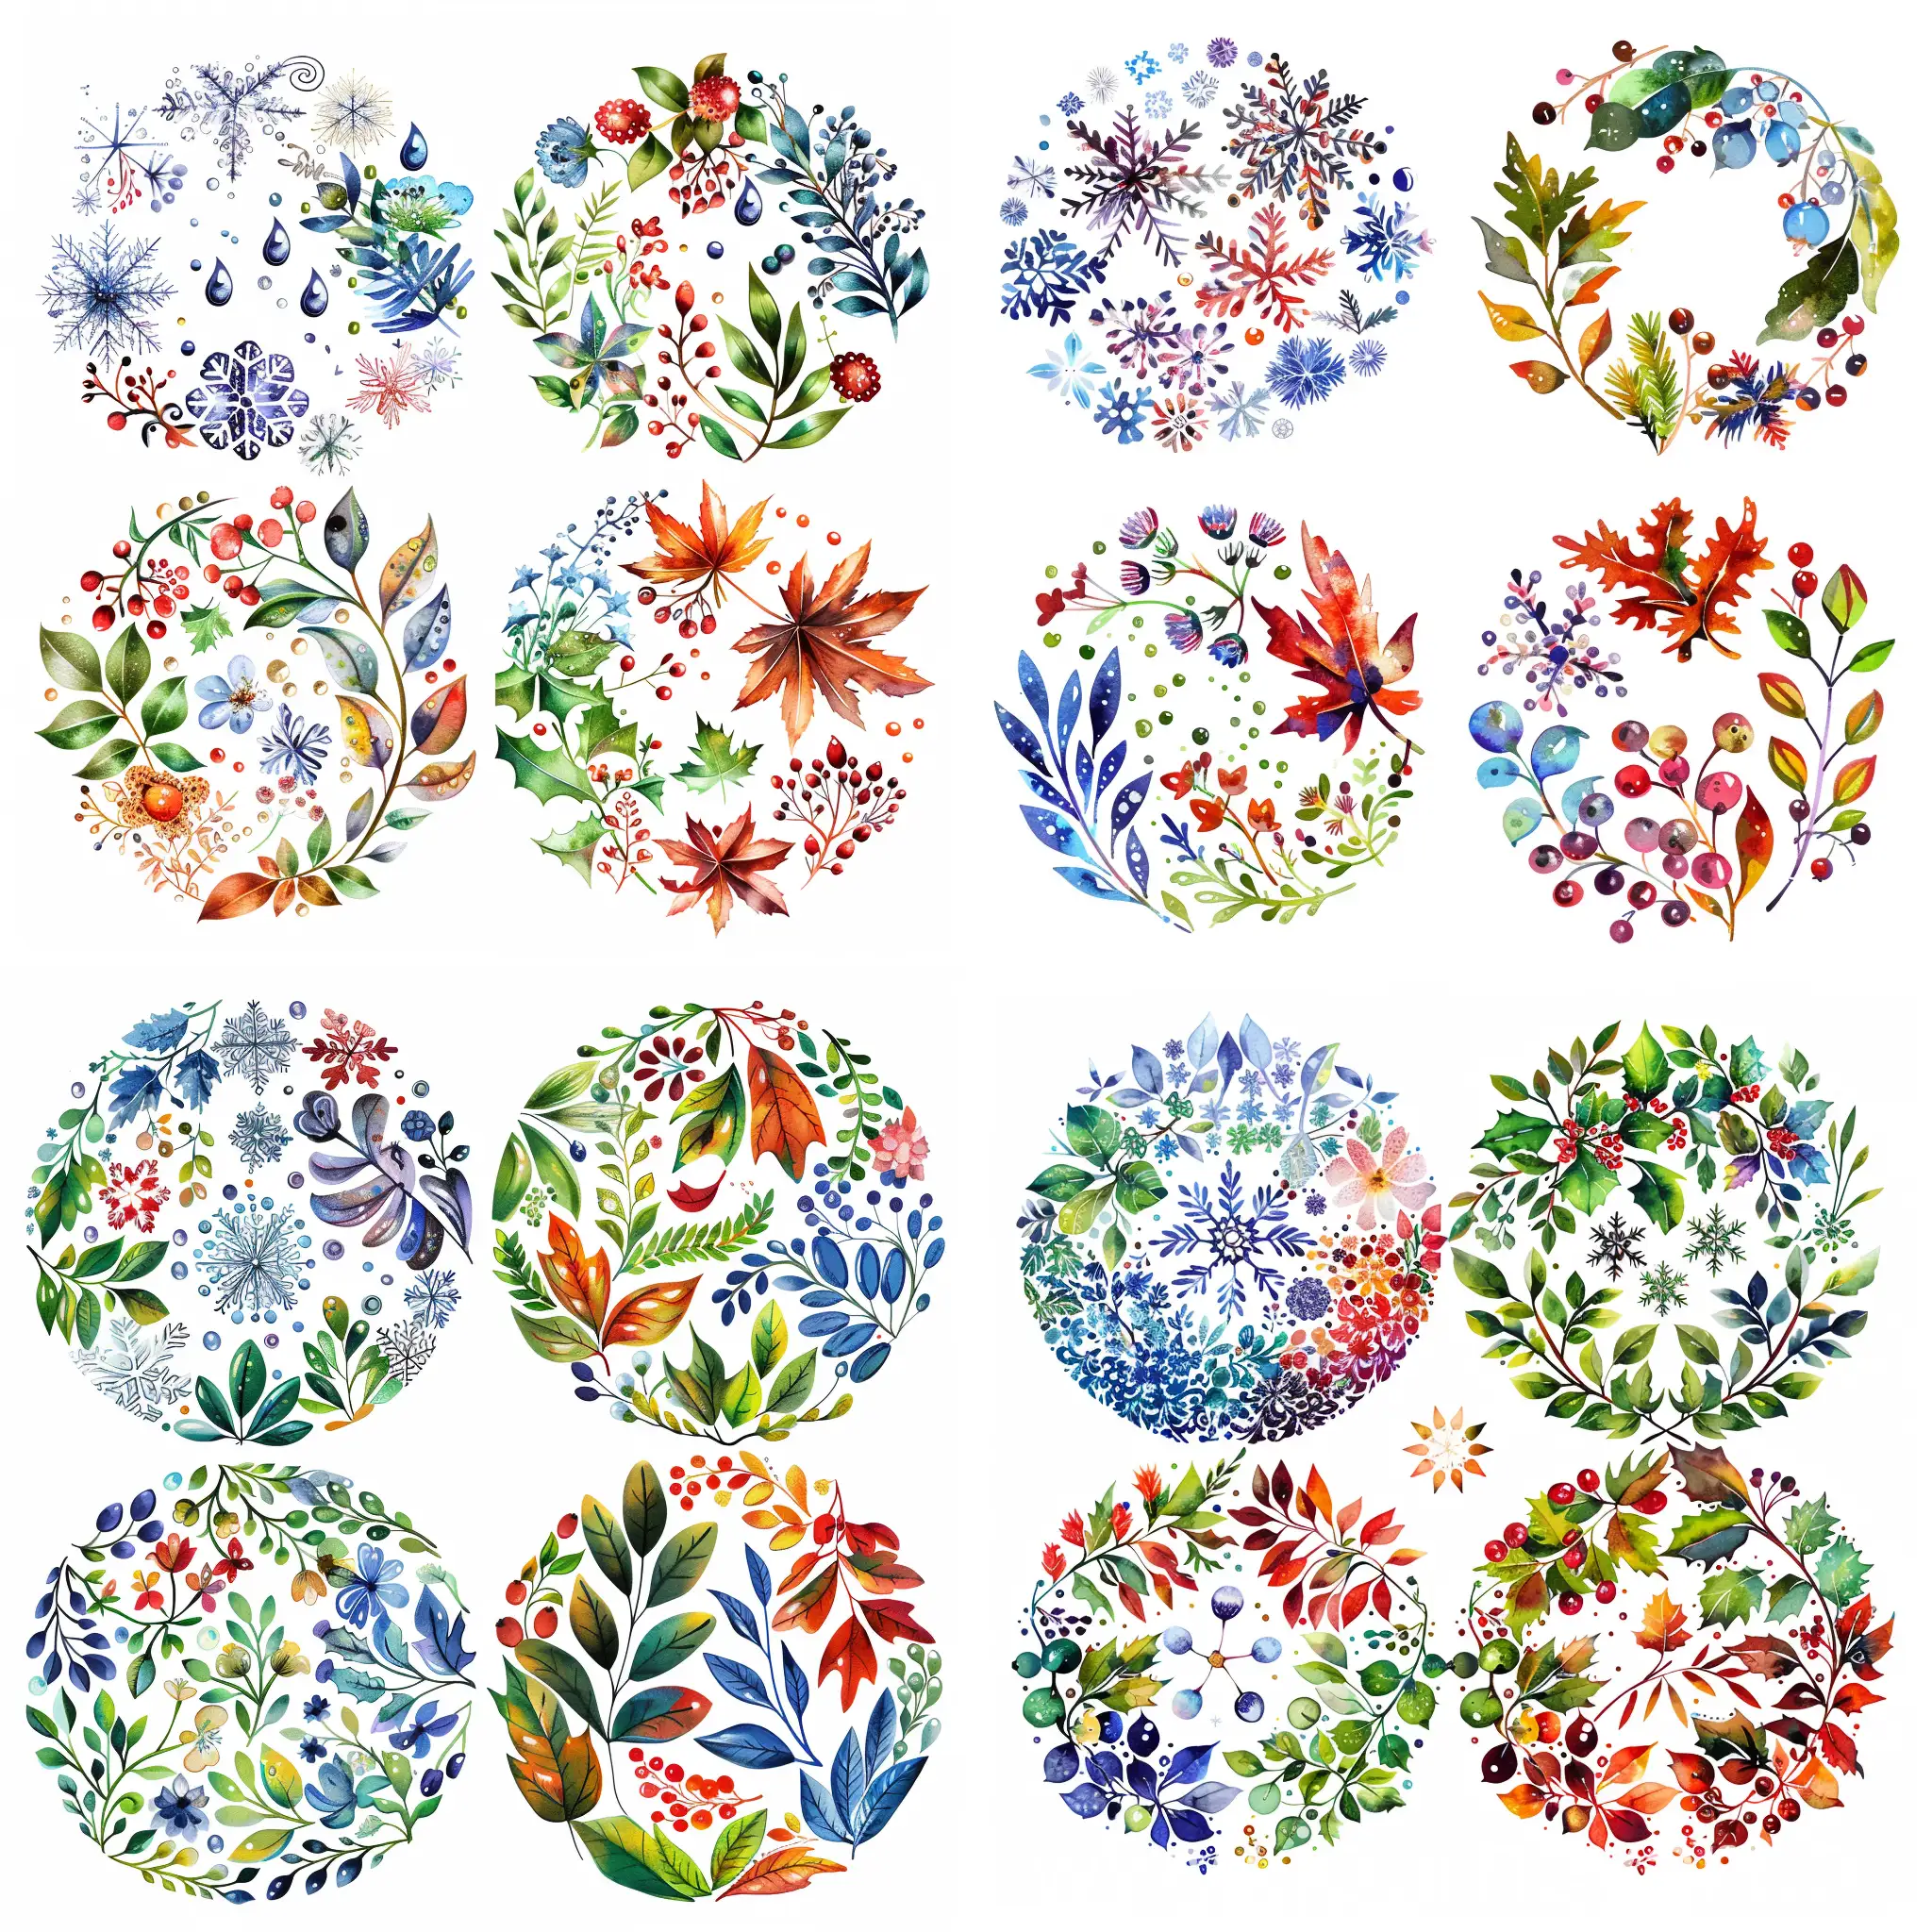 four symmetrical round ornaments, the first ornament theme is winter with snowflakes, the second ornament theme is spring, with drops, small flowers, the third ornament theme is summer with leaves of flowers, the fourth ornament theme is autumn, with berries and autumn leaves, on a white background, vector style, watercolor, decorative, flat drawing